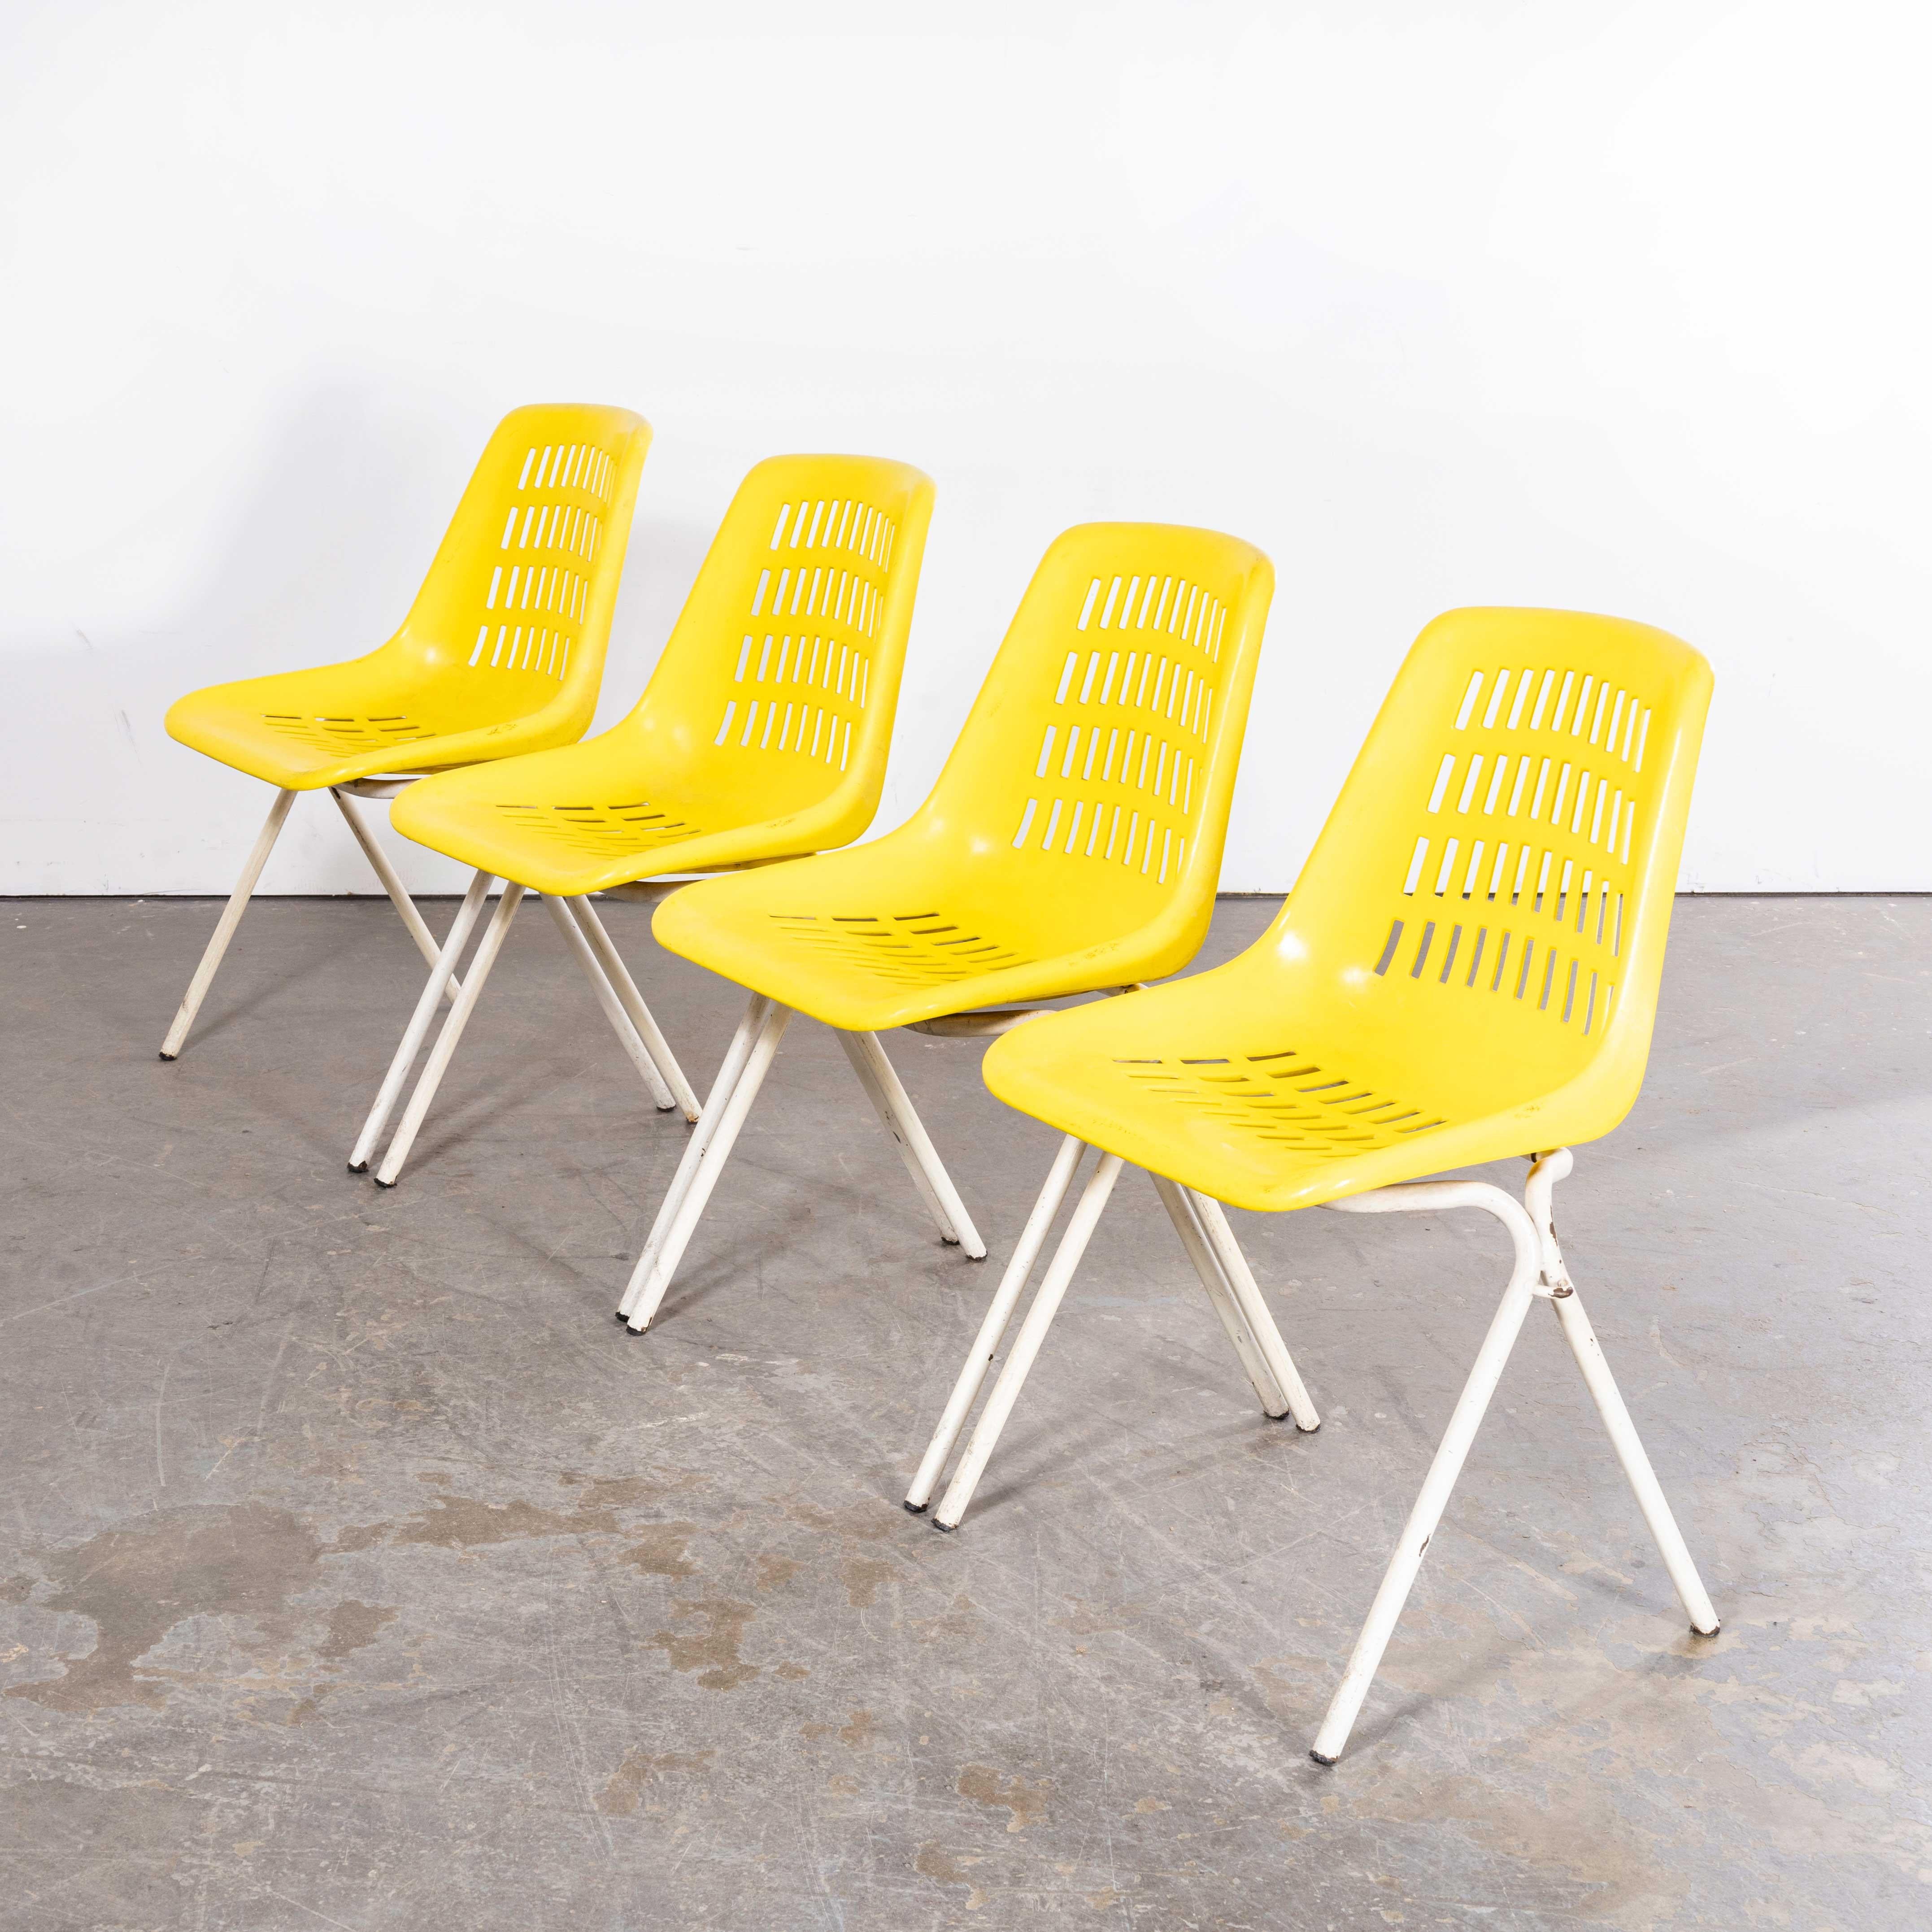 italien 1970's Classic Yellow Stacking Italian Bar Dining Chairs - Set Of Four en vente